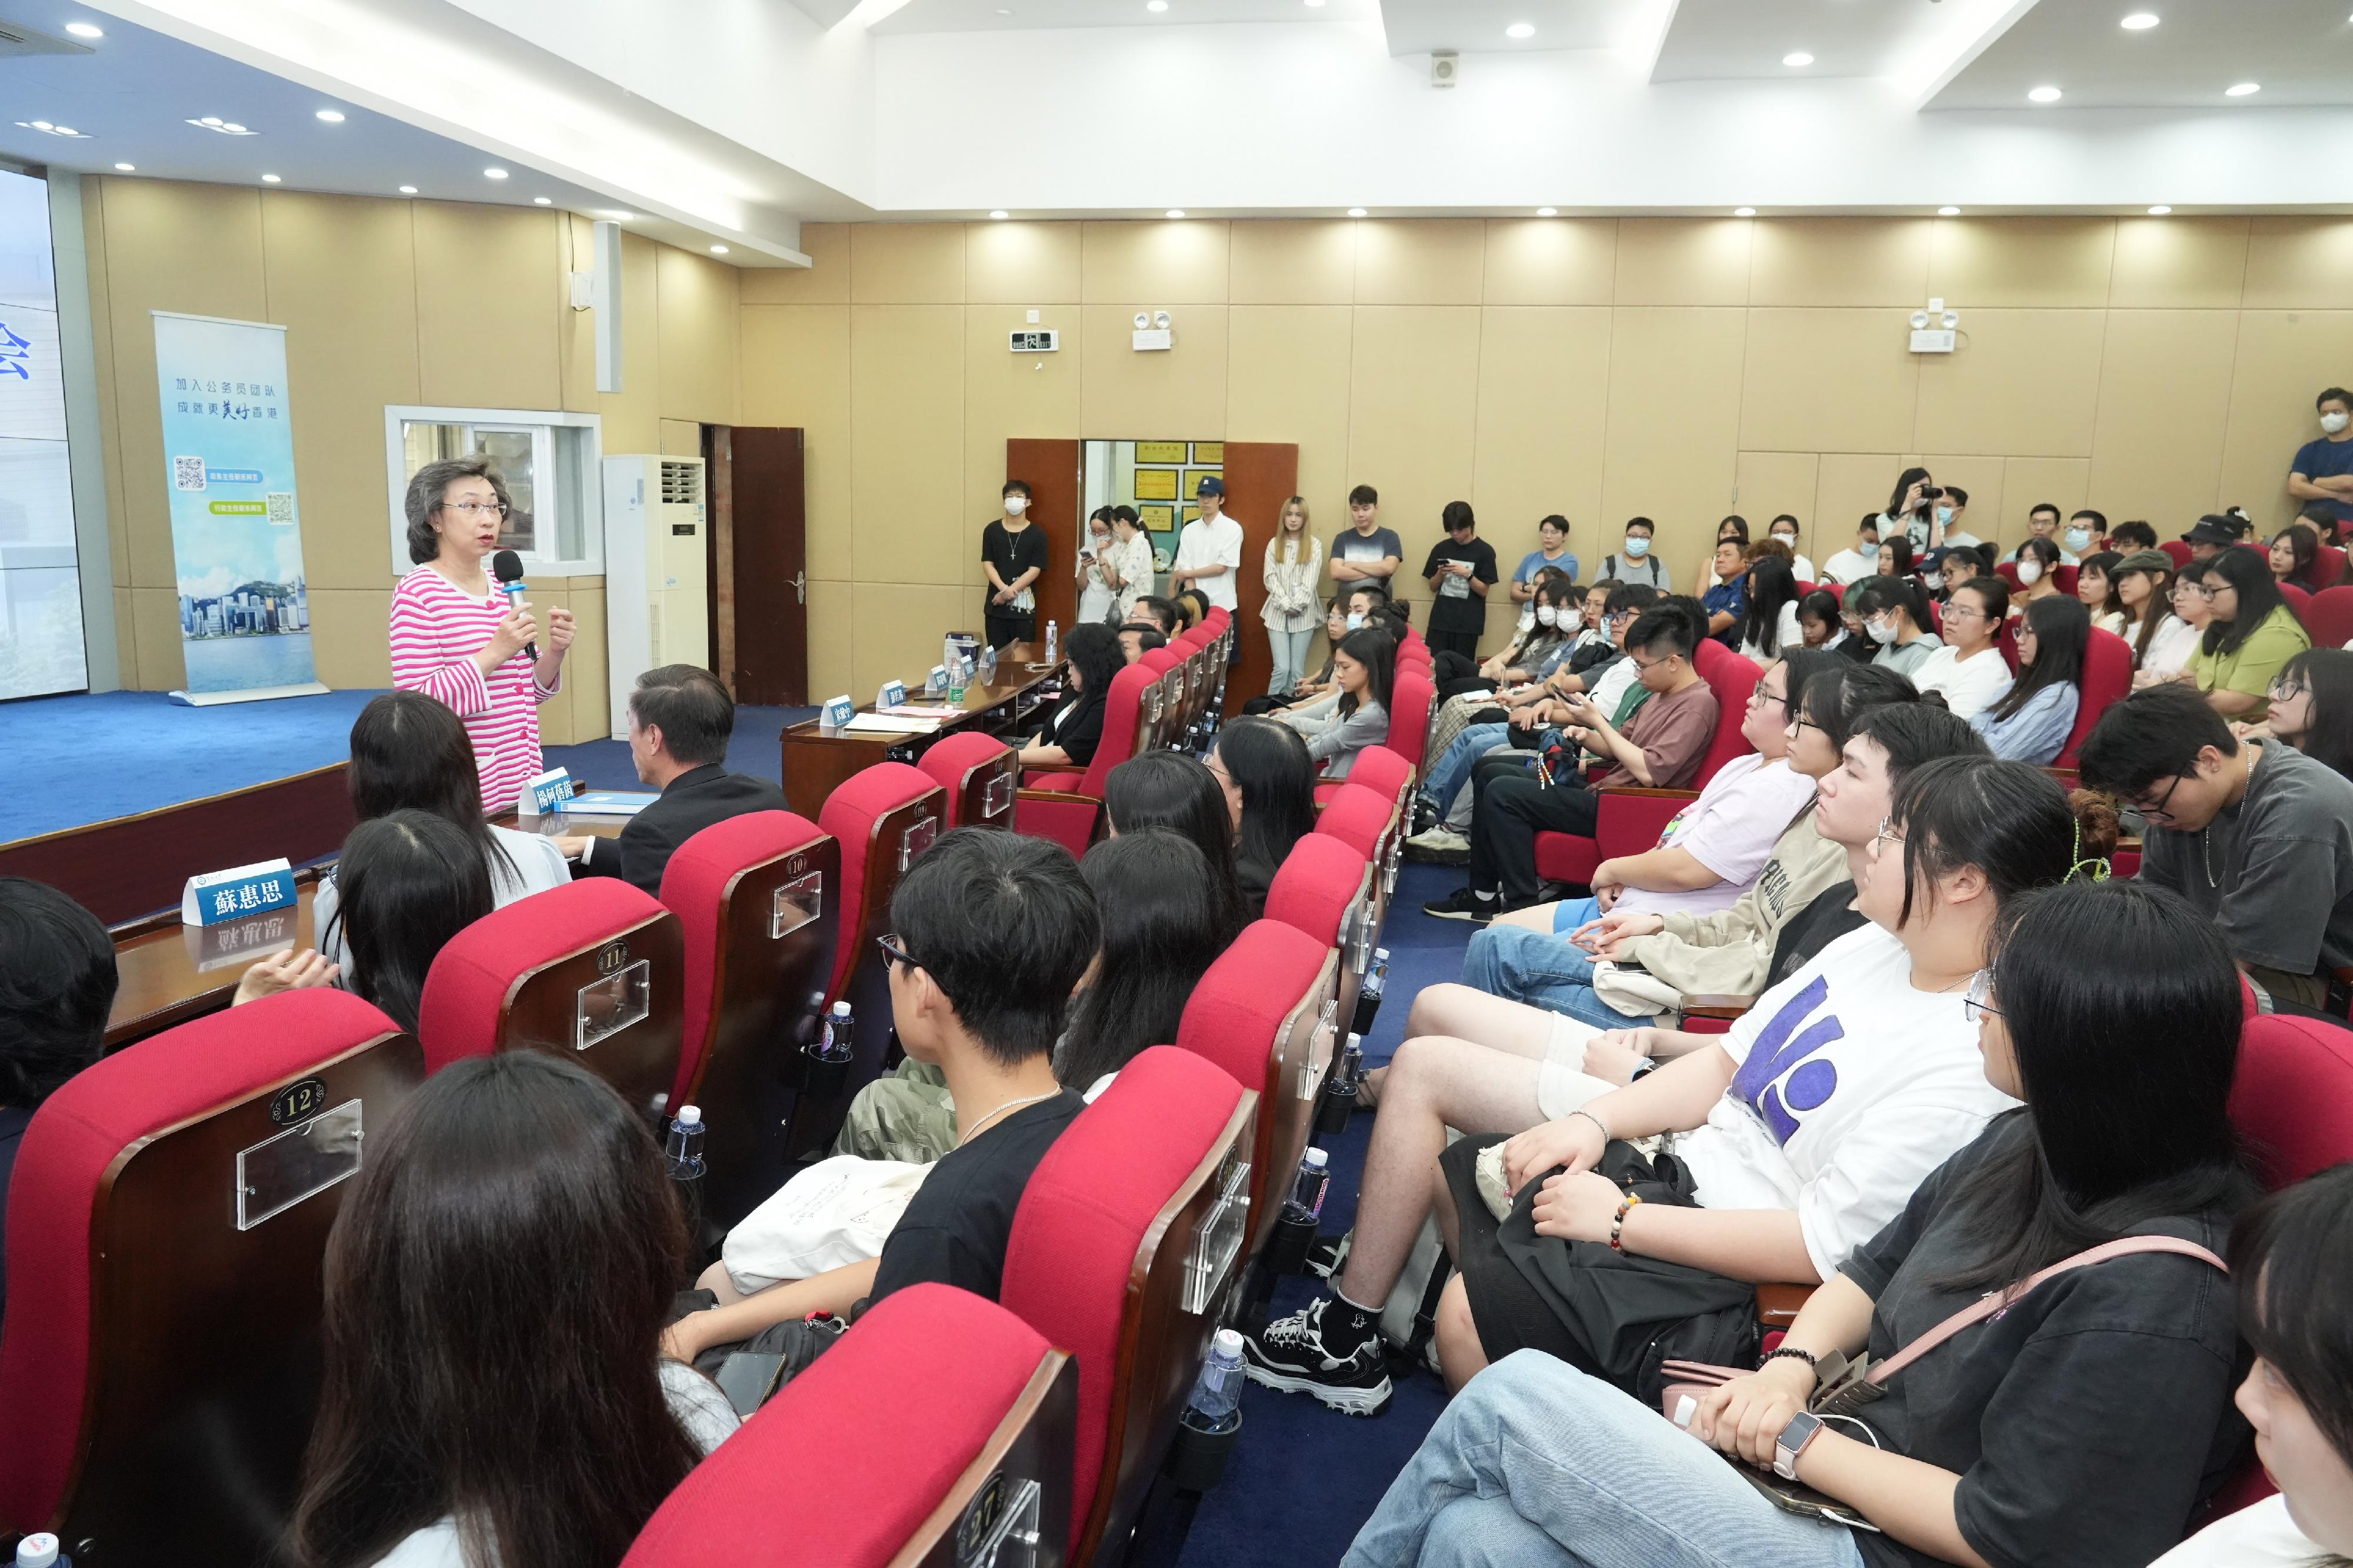 The Civil Service Bureau of the Hong Kong Special Administrative Region (HKSAR) Government held a recruitment seminar for the civil service of the HKSAR at Jinan University today (September 6). The Secretary for the Civil Service, Mrs Ingrid Yeung, and the Director of General Grades of the Civil Service Bureau, Mr Hermes Chan, met with some 130 Hong Kong students to introduce the work of the HKSAR Government civil service and the employment opportunities available for young people, and answer their enquiries. Photo shows Mrs Yeung answering questions from the students.